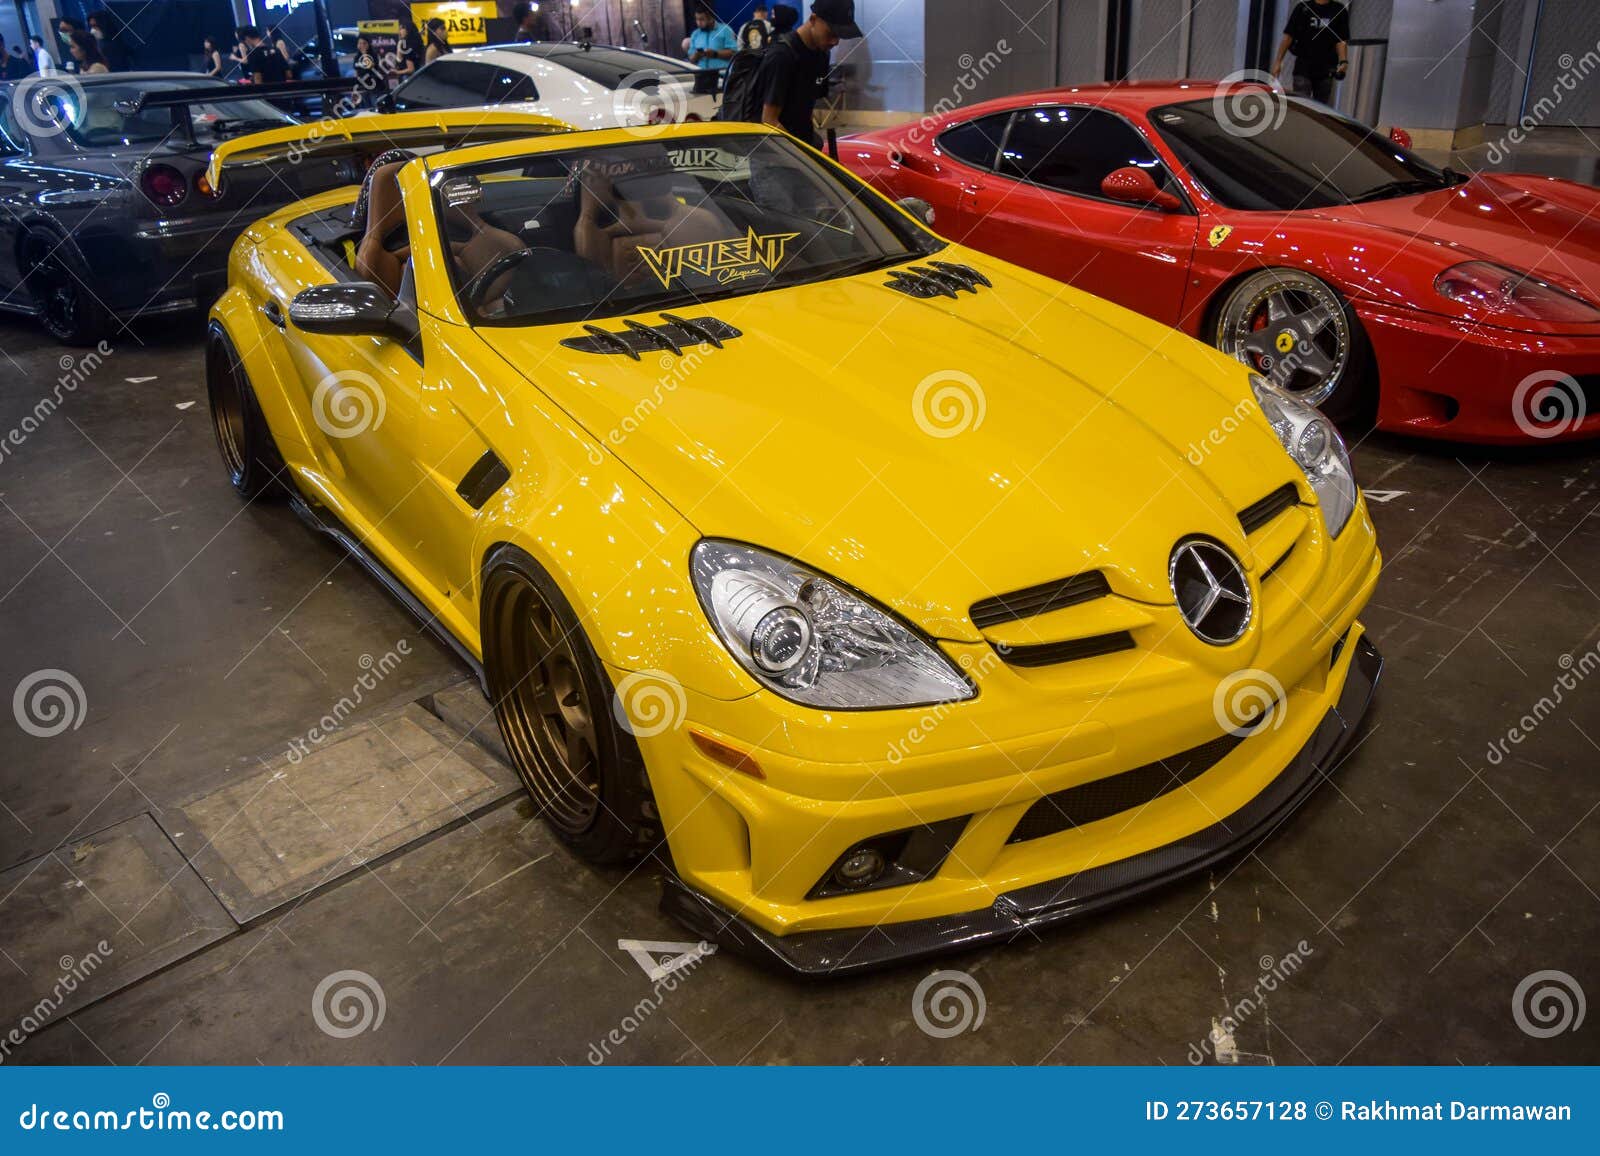 https://thumbs.dreamstime.com/z/south-tangerang-indonesia-february-yellow-mercedes-benz-slk-class-modified-owner-displayed-elite-showcase-r-273657128.jpg